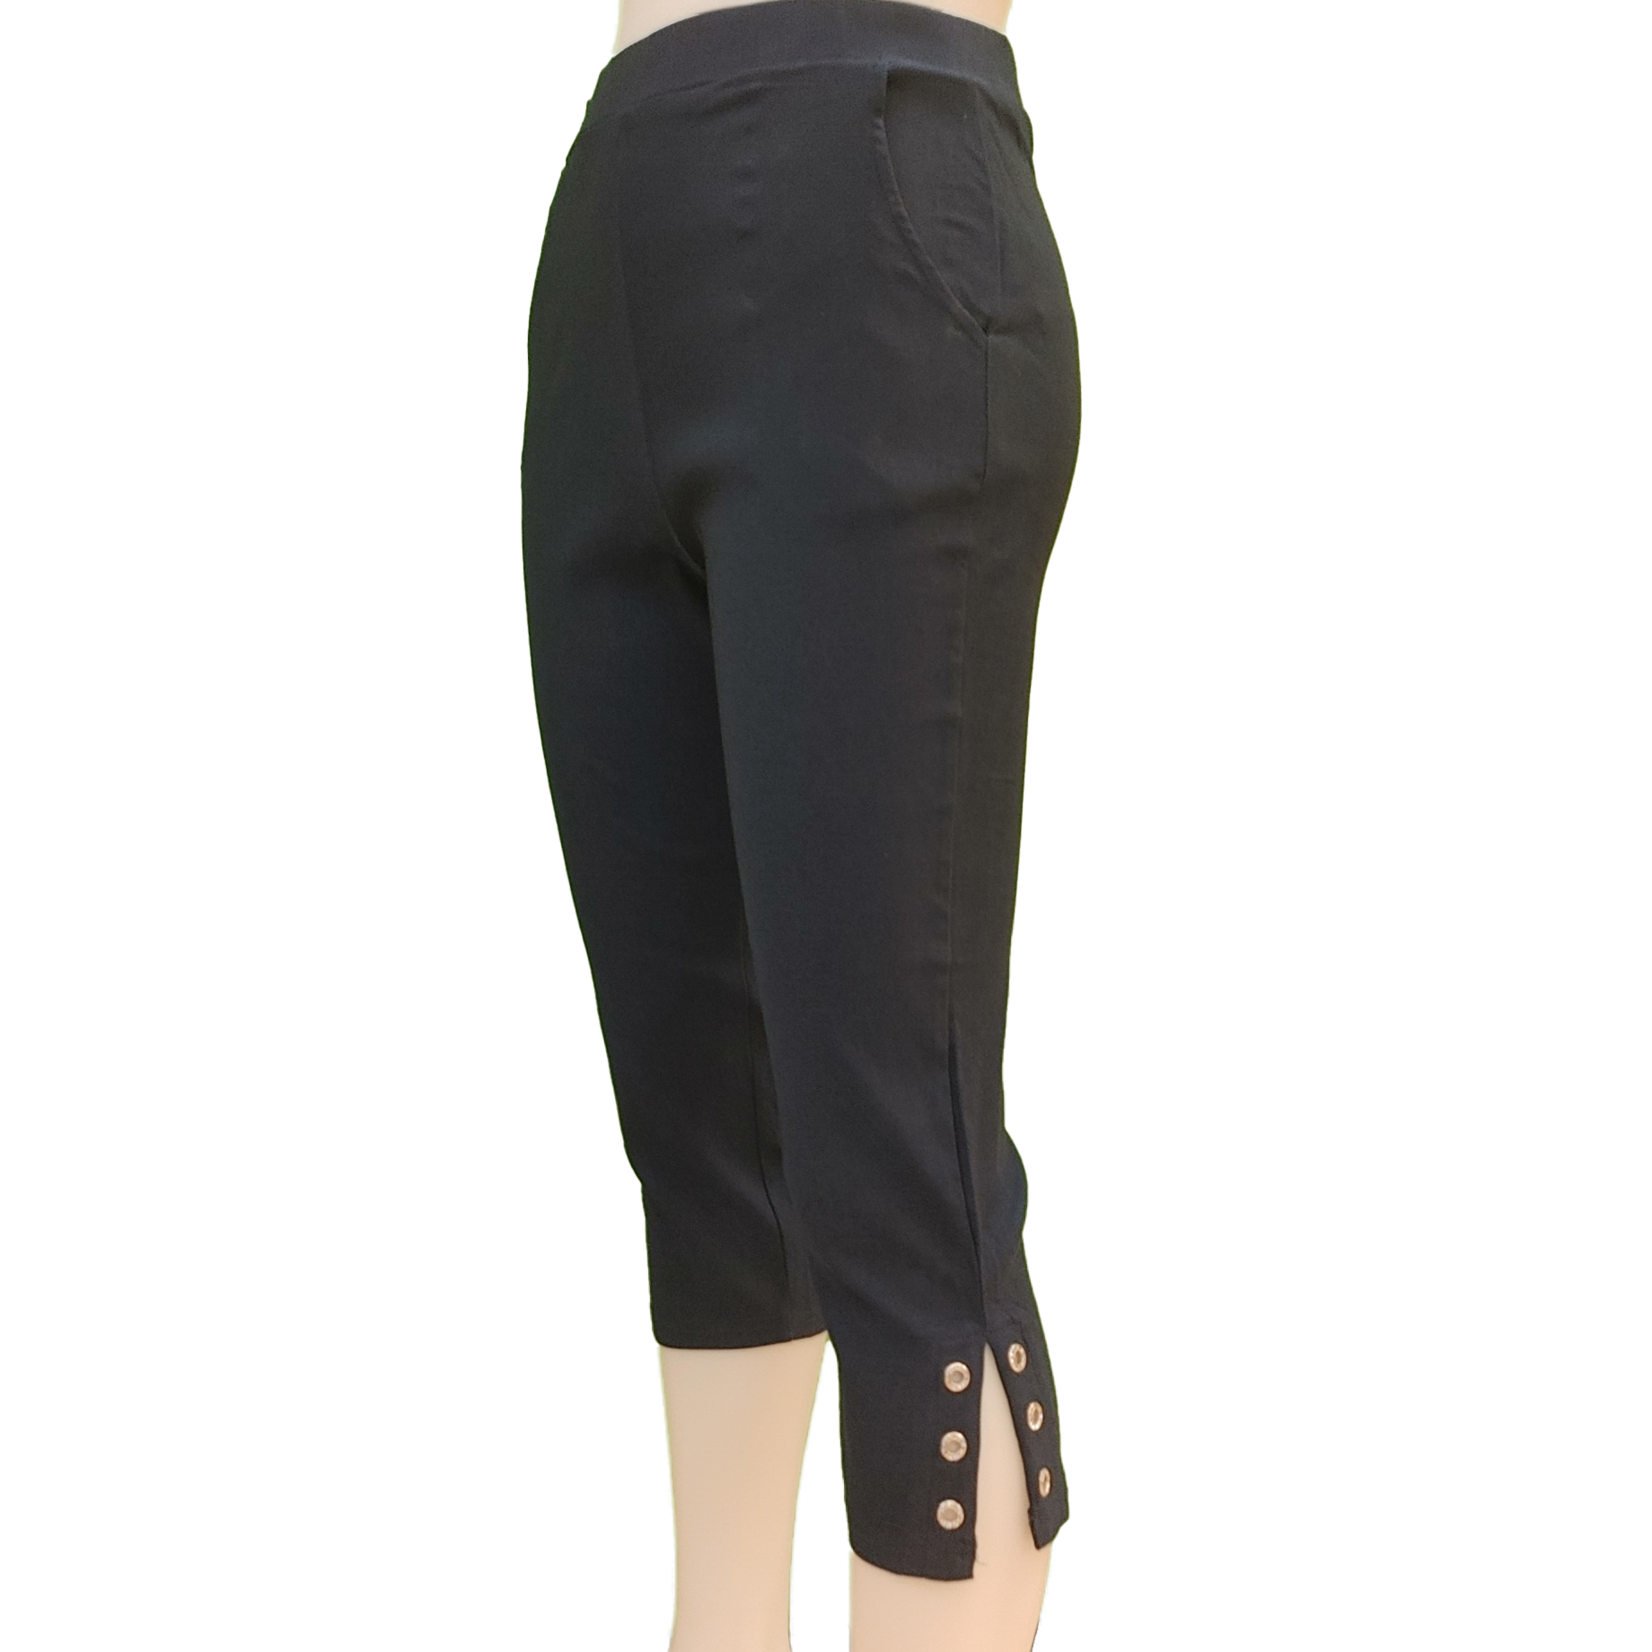 Creations pull on stretch capri pant with grommet detail, capris, pants